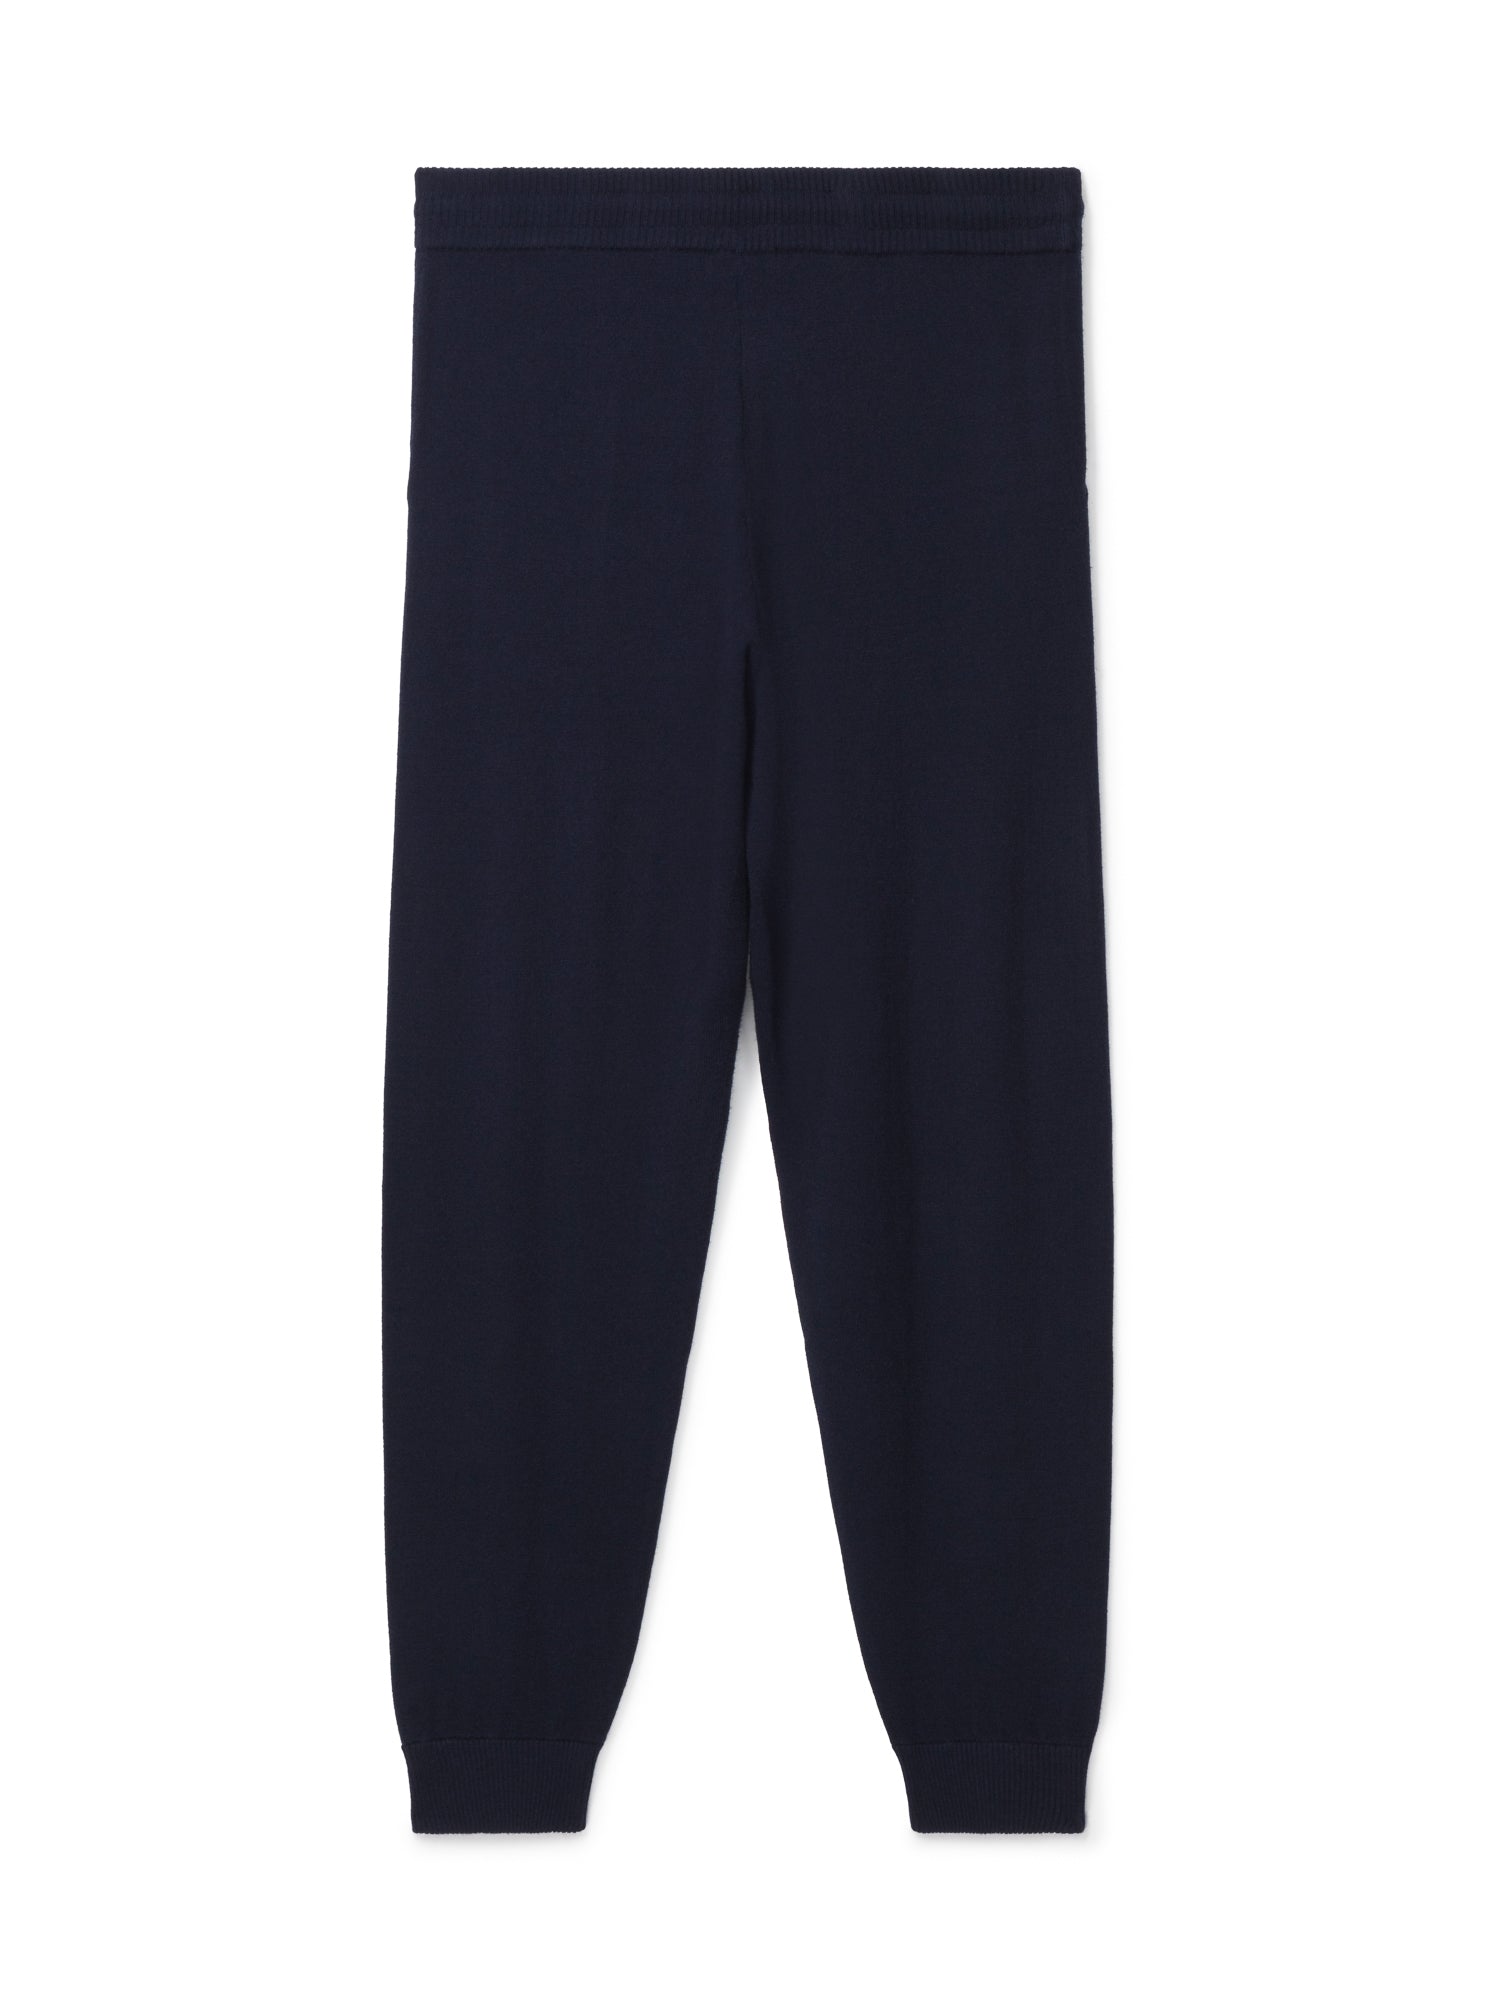 Lucy Knit Pant